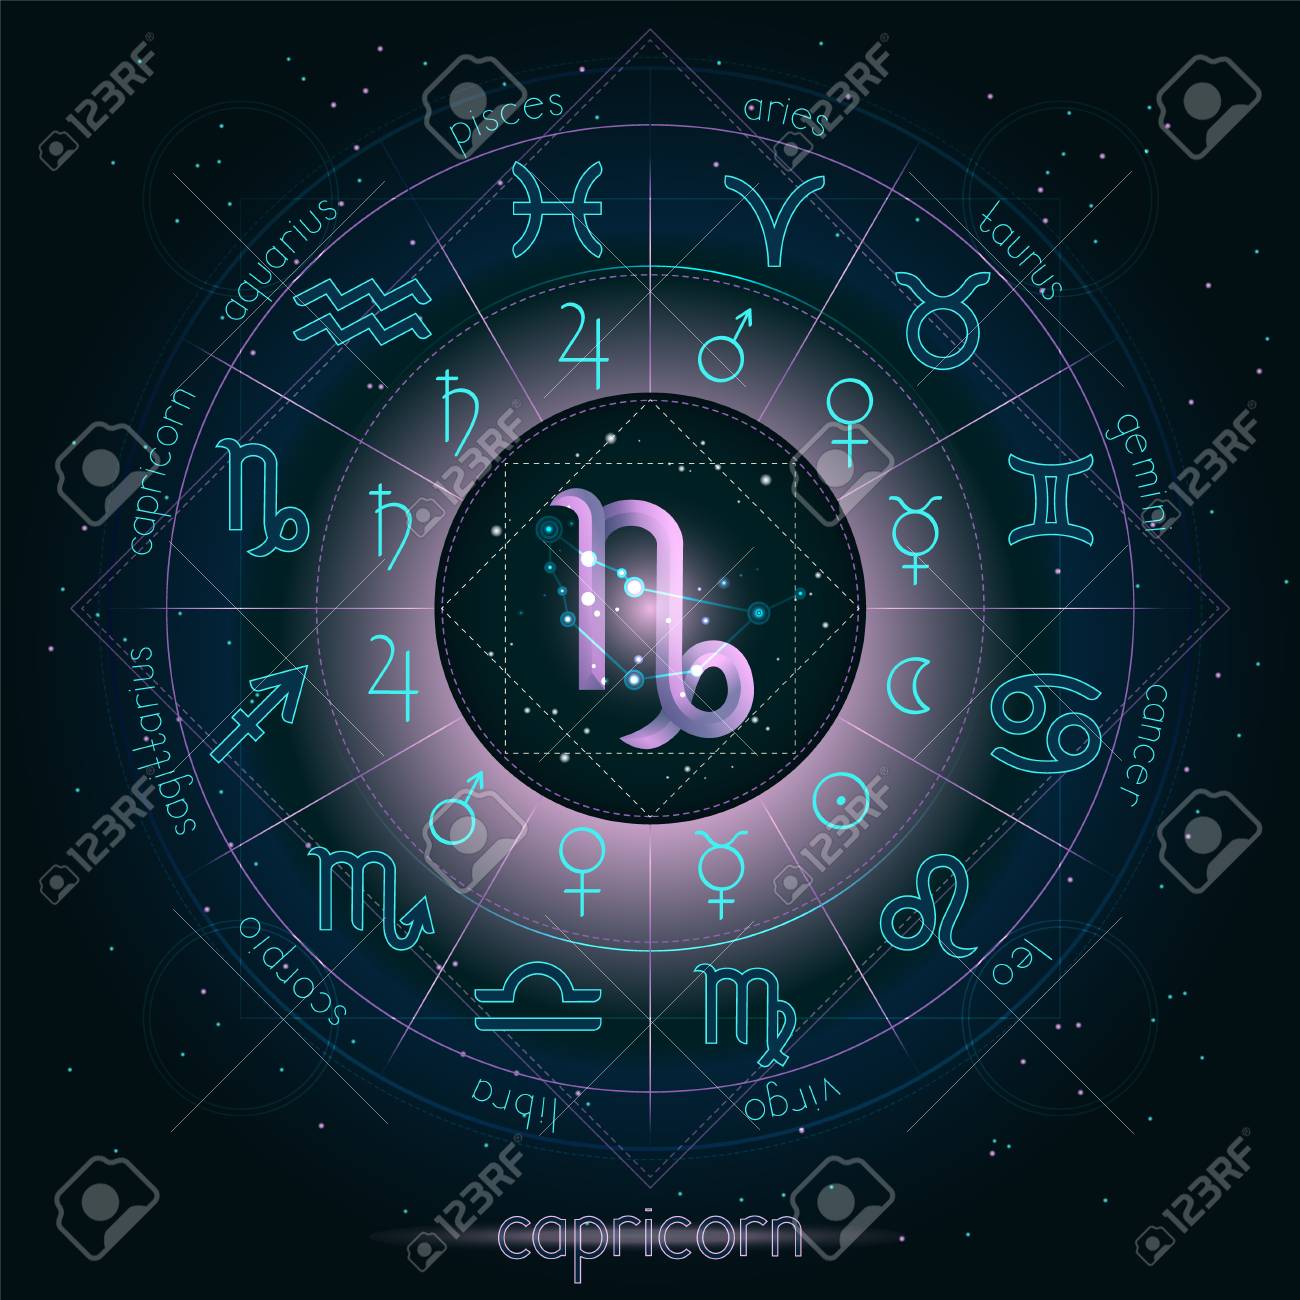 Zodiac Sign And Constellation Capricorn With Horoscope Circle